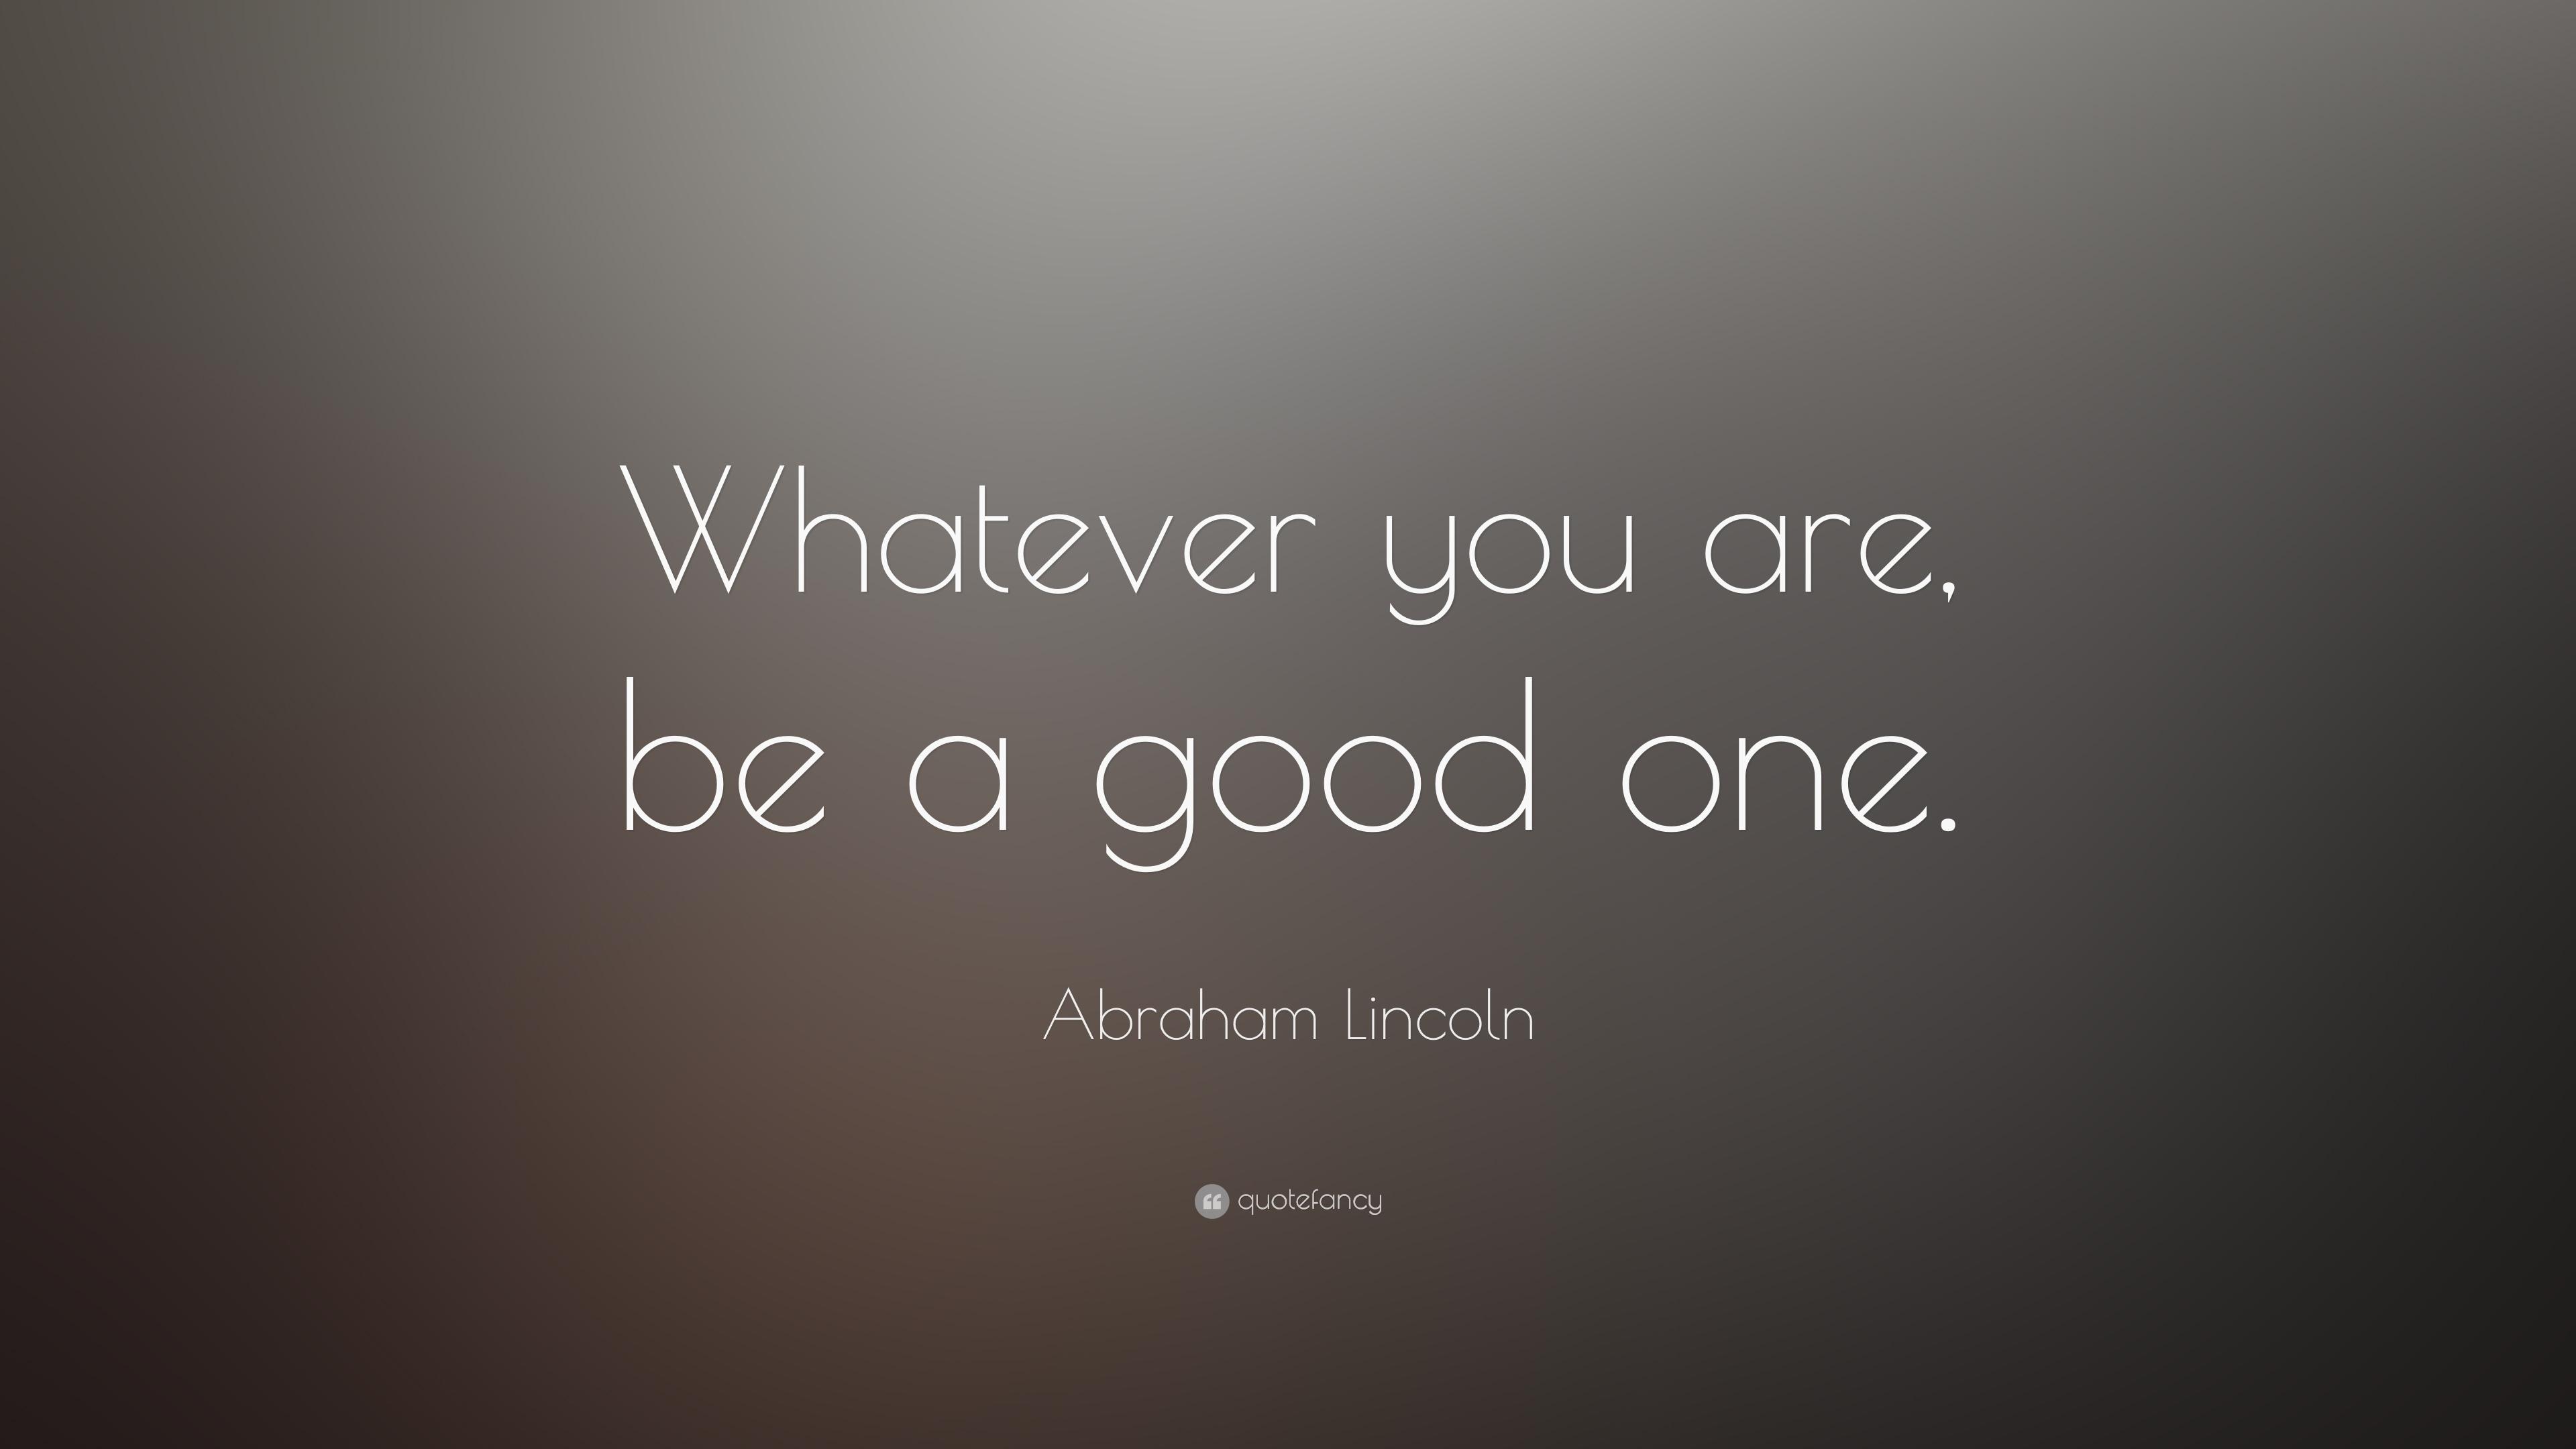 Abraham Lincoln Quote: “Whatever you are, be a good one.” 23